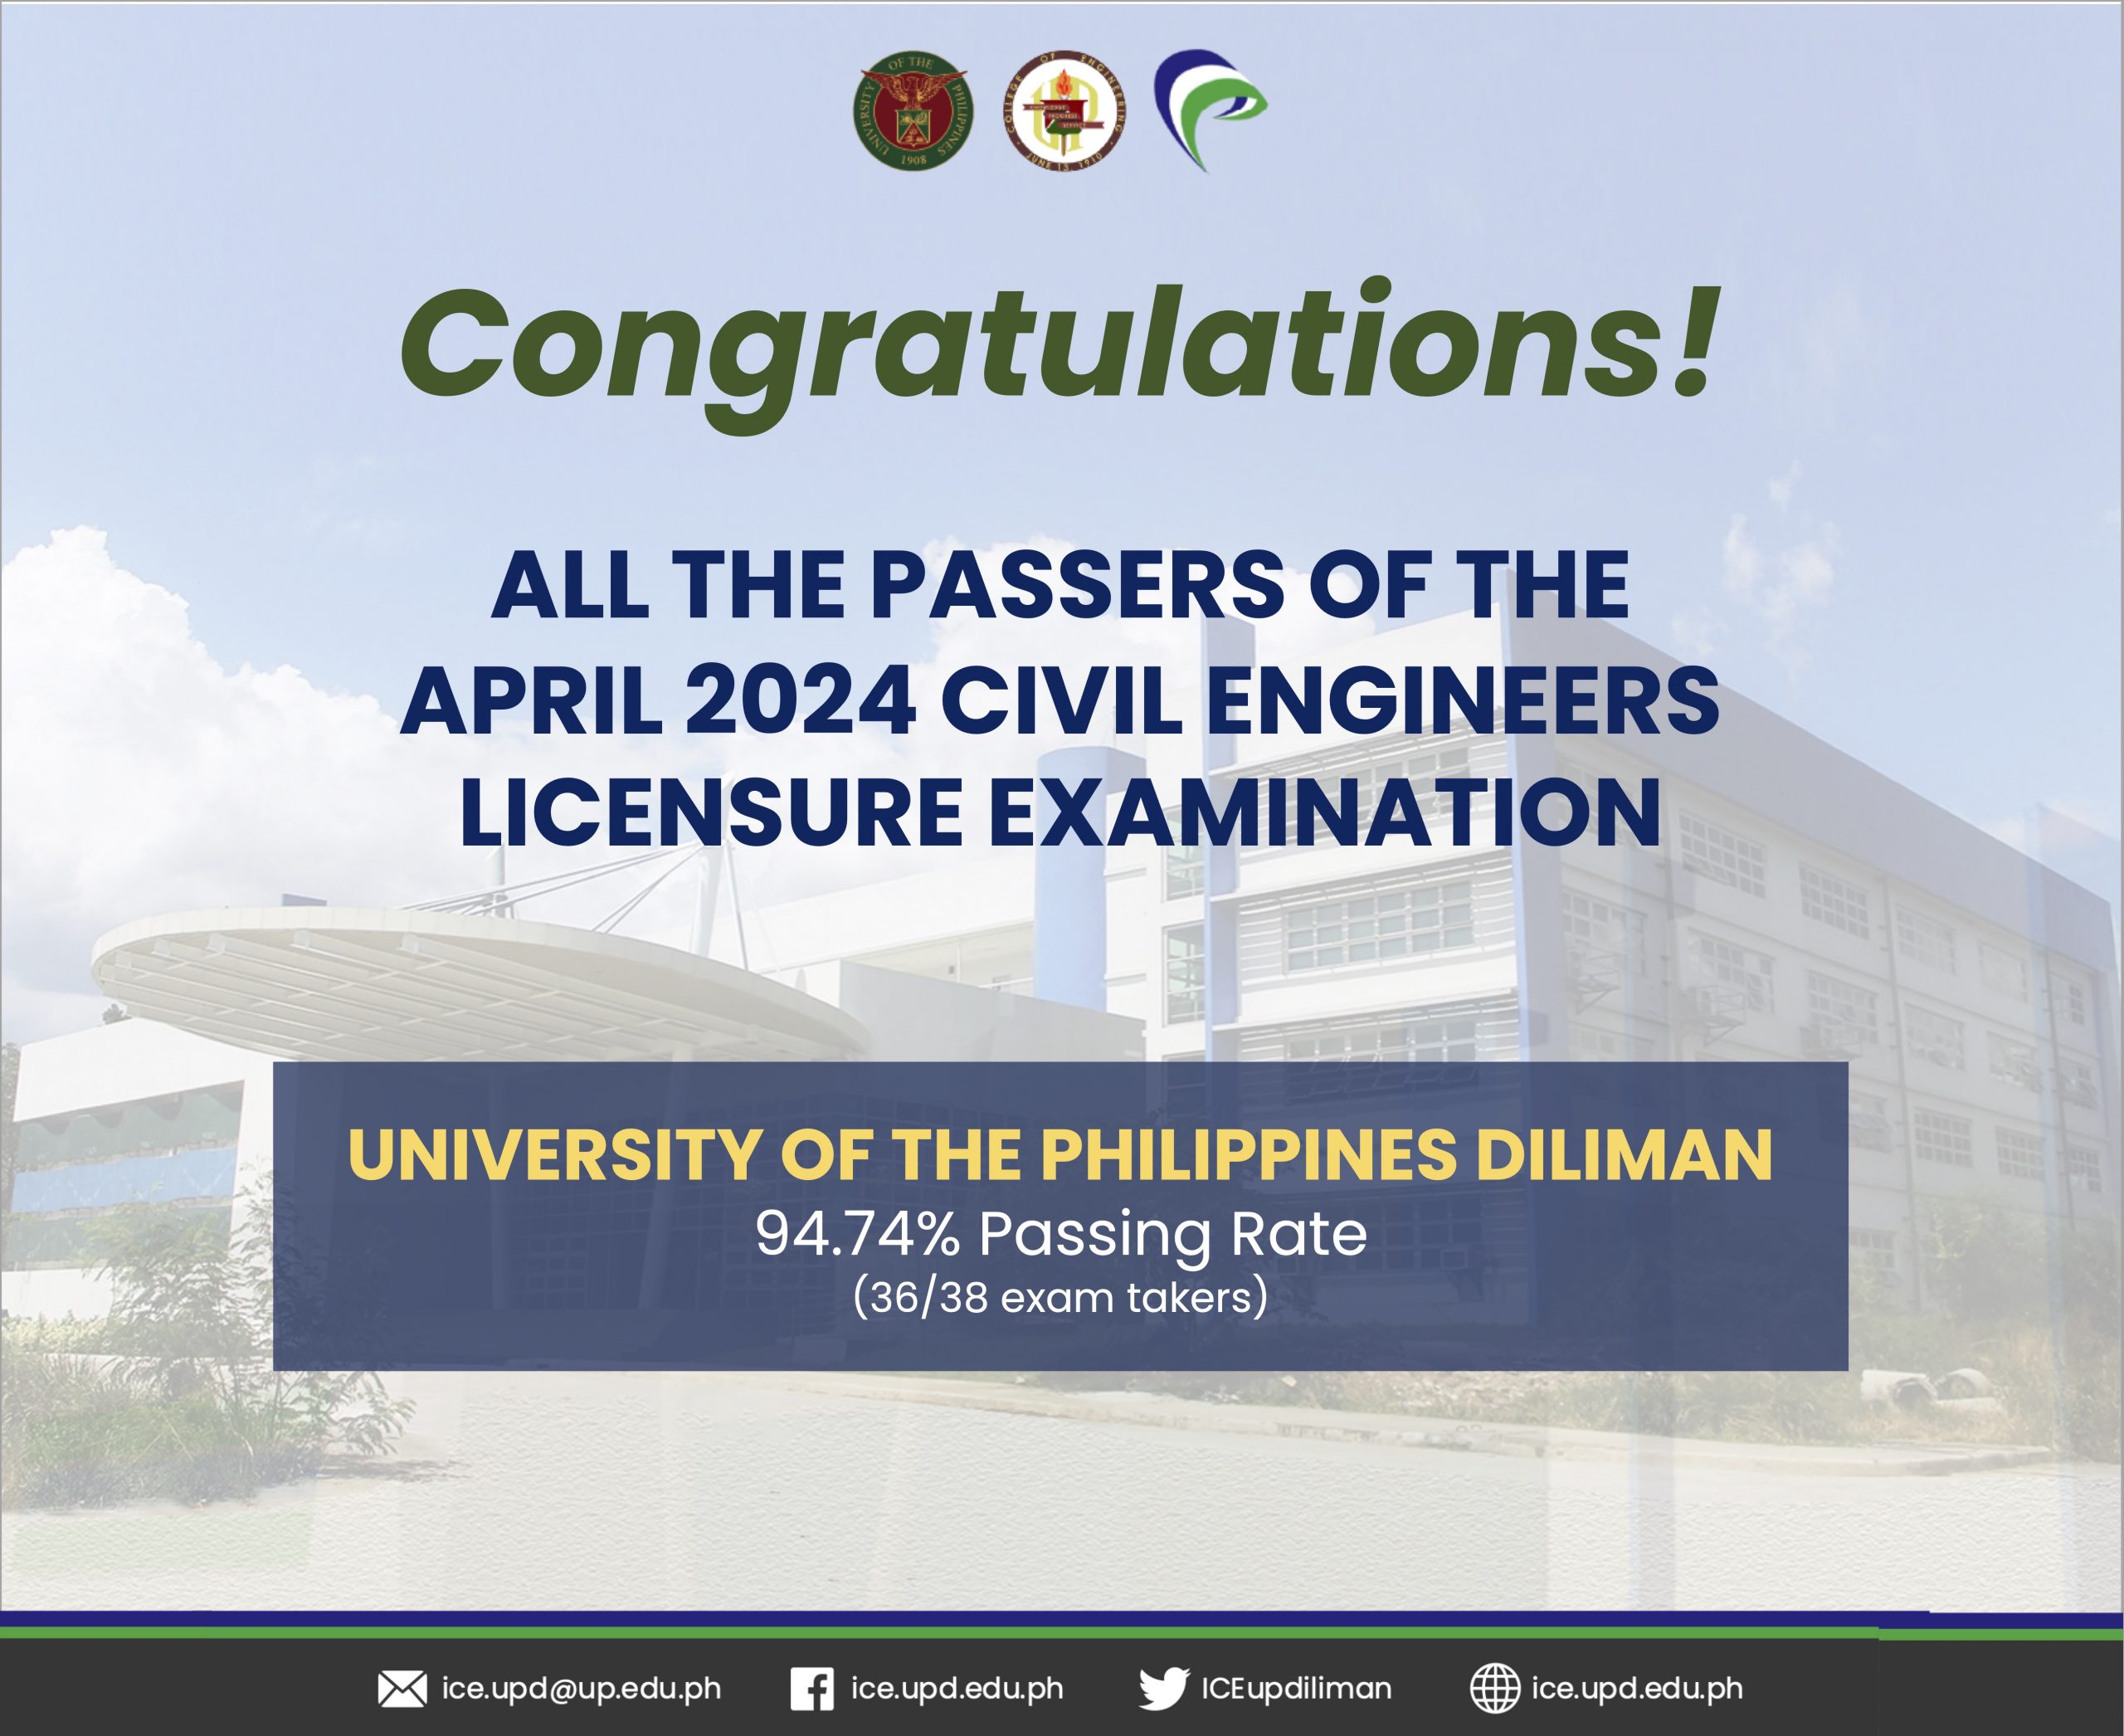 UPD got 94.74% passing rate in the April 2024 CE Board Exam